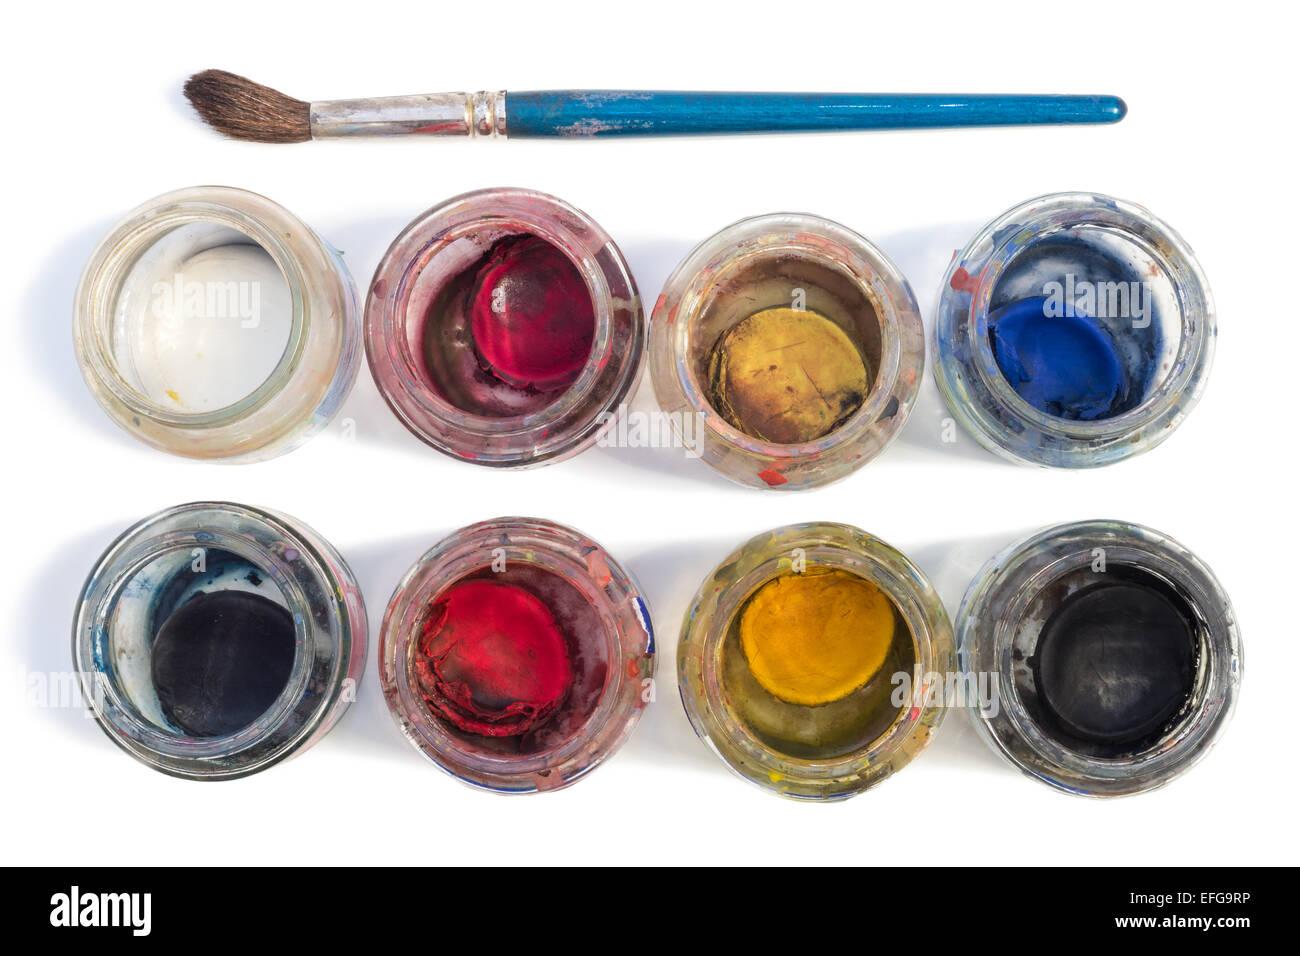 A brush and used watercolors in small glass jars isolated on white background, viewed from above. Stock Photo